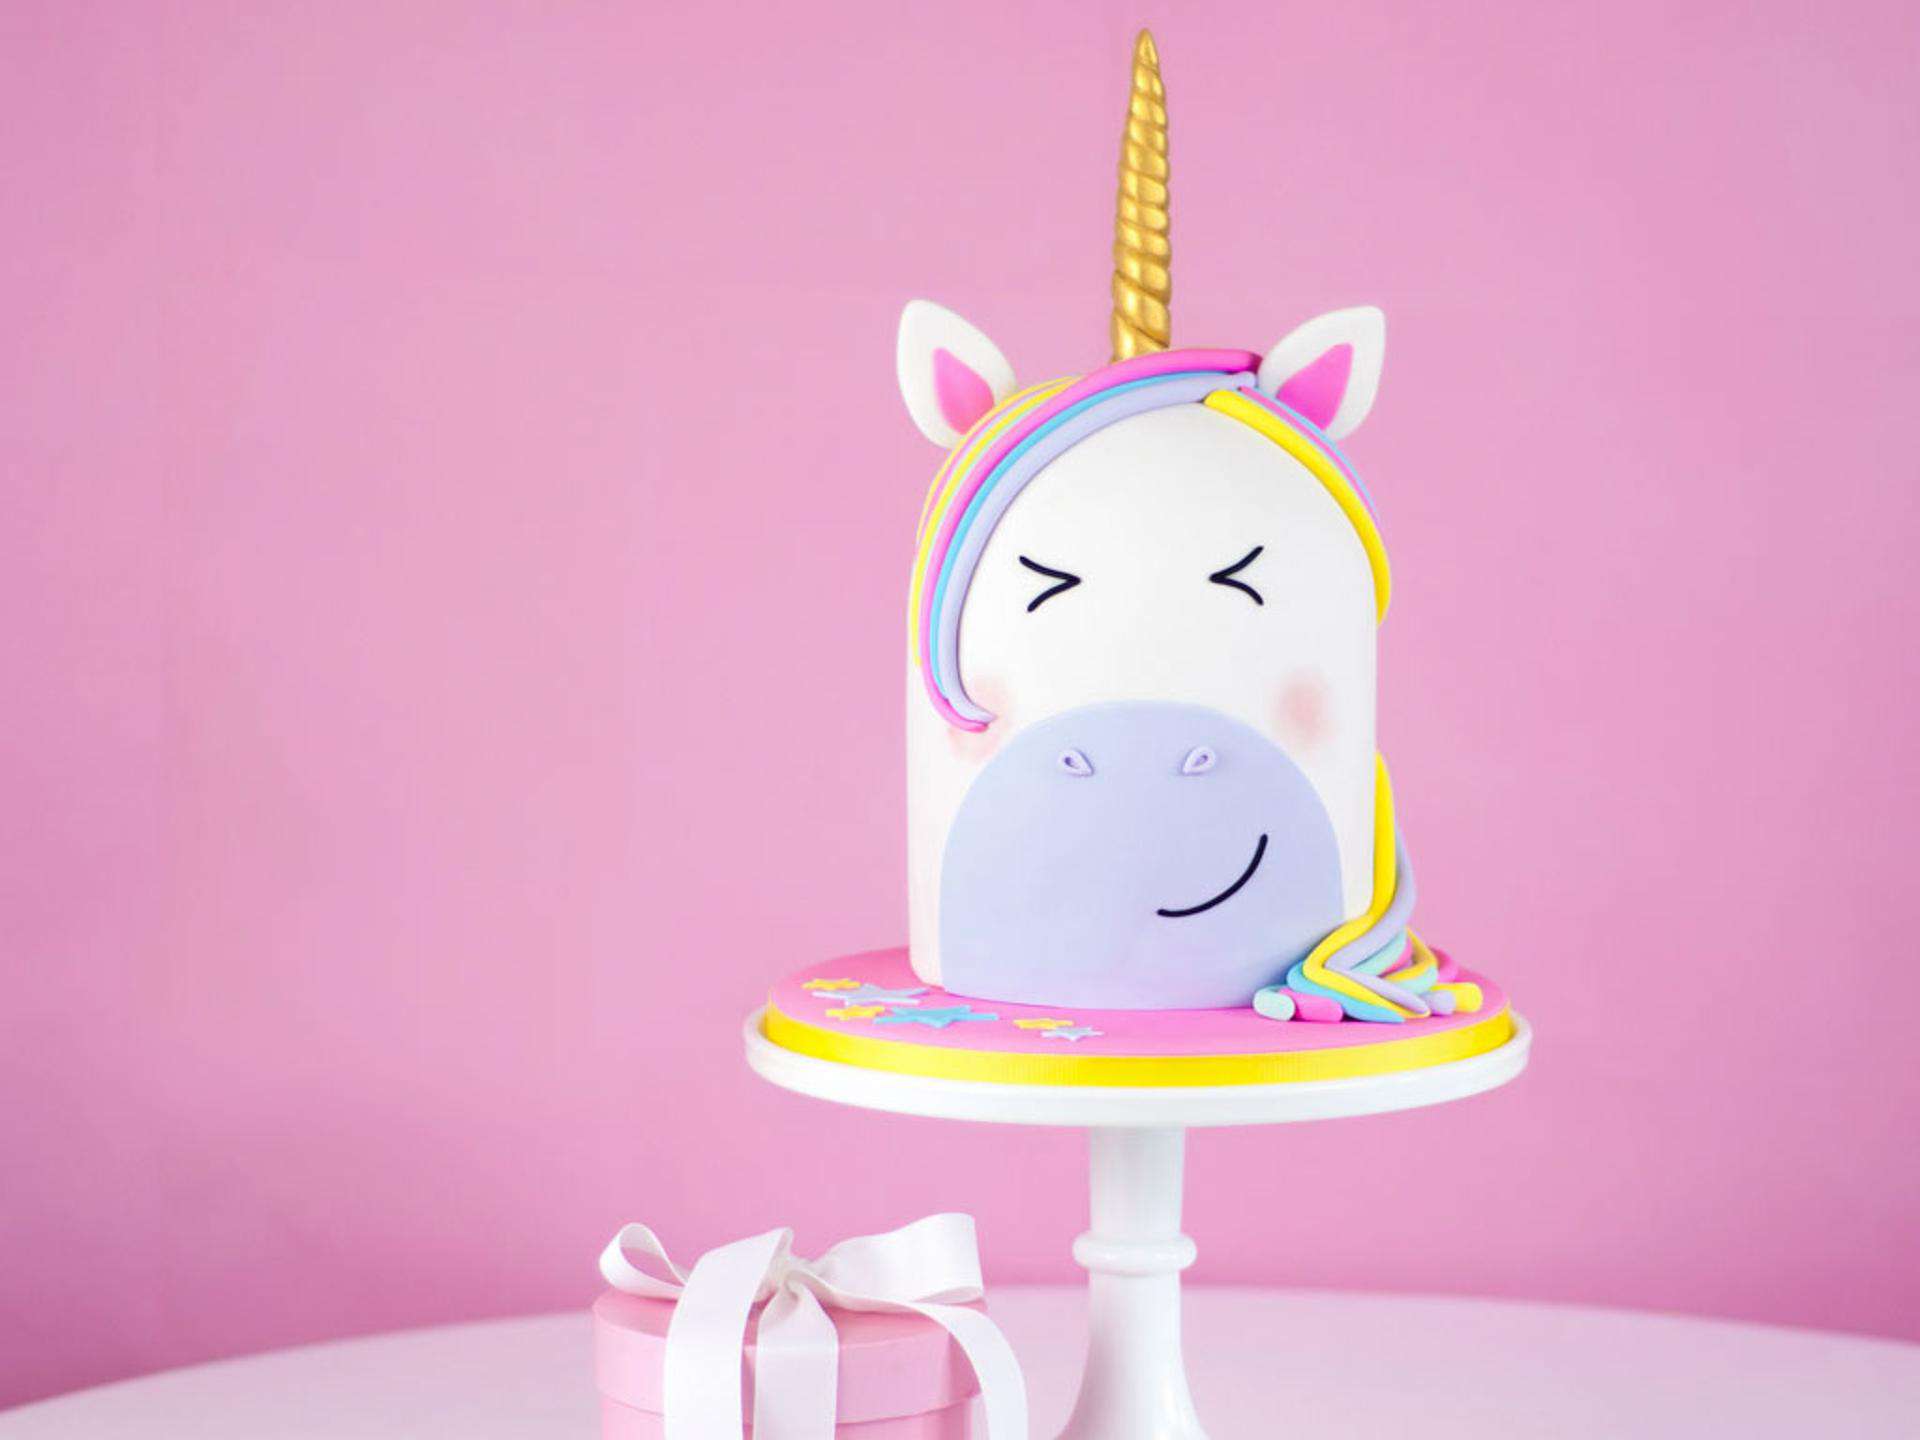 Unicorn anything is all the rage! They are magical, brightly colored, and oh so fun. This Rainbow Unicorn Cake is simply amazing. Bright colors, a gold horn, and fondant galore. 